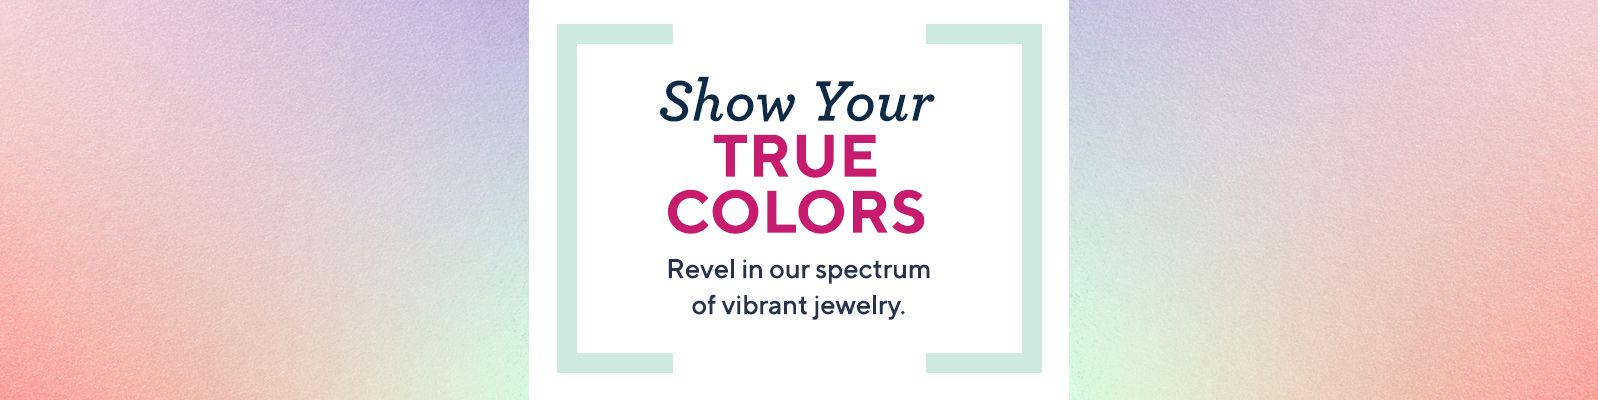 Show Your True Colors - Revel in our spectrum of vibrant jewelry.